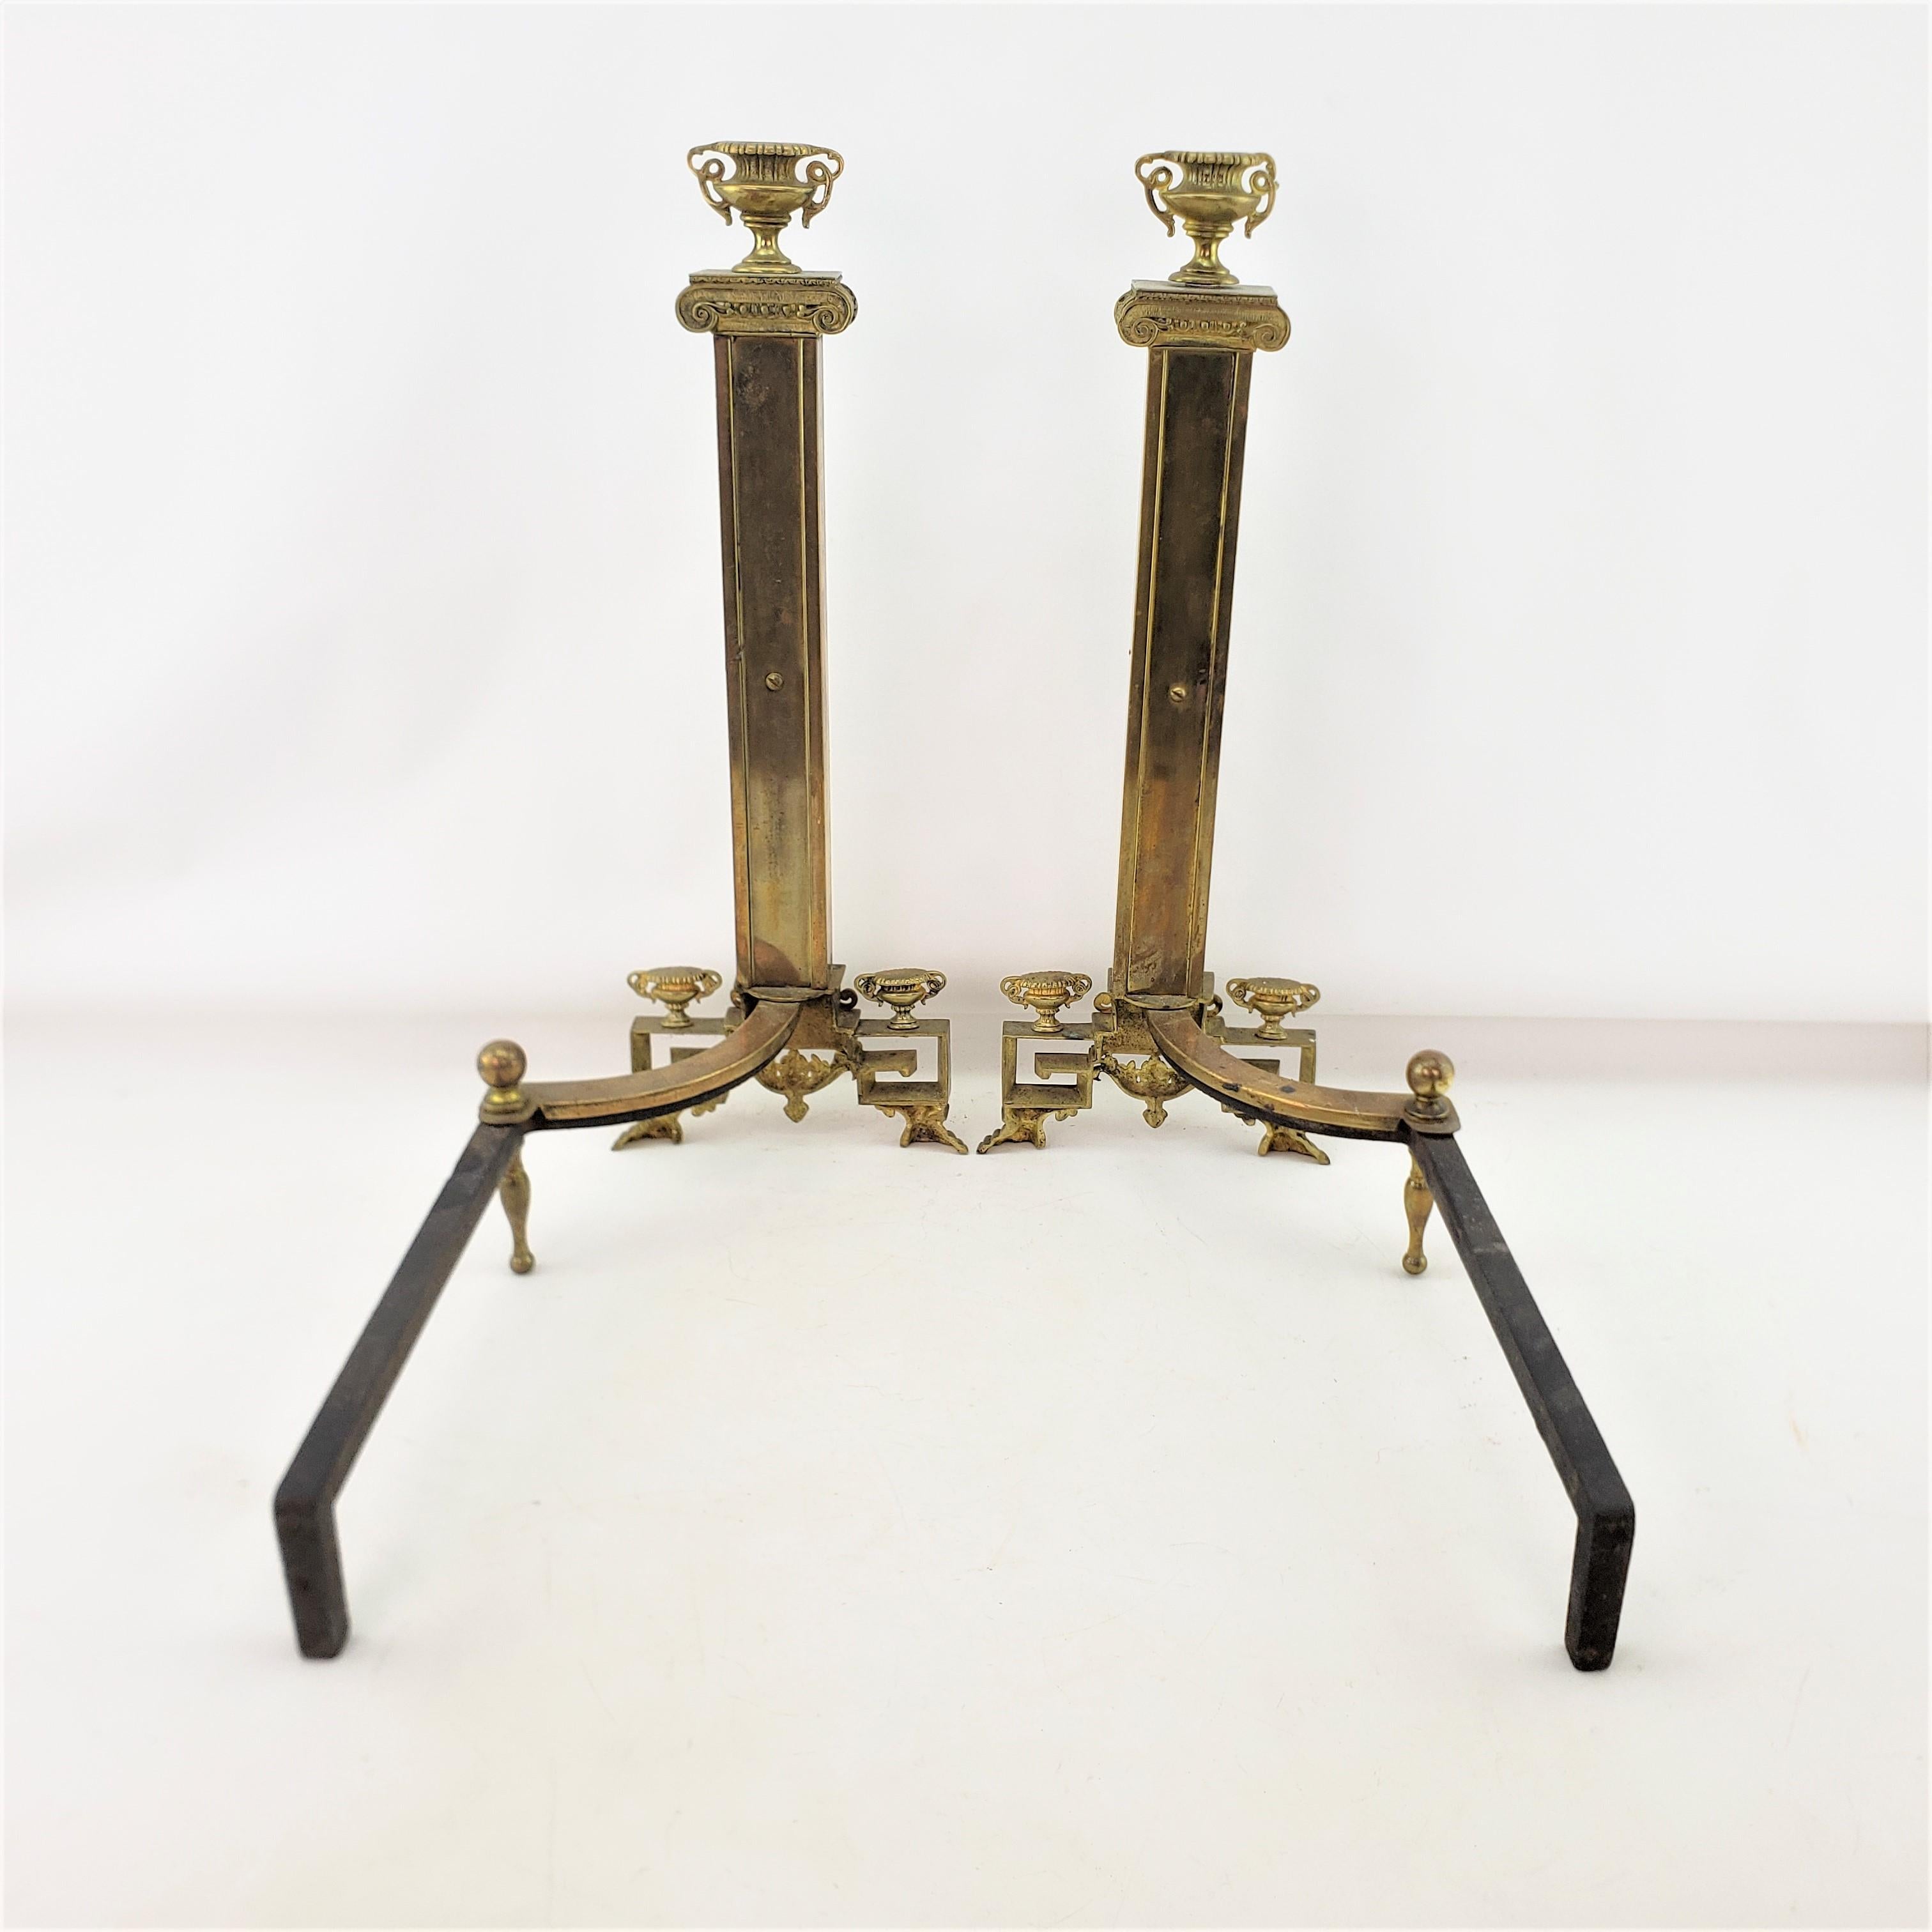 20th Century Antique Neoclassical Styled Andirons with Brass Urns & Lion Head Accents For Sale